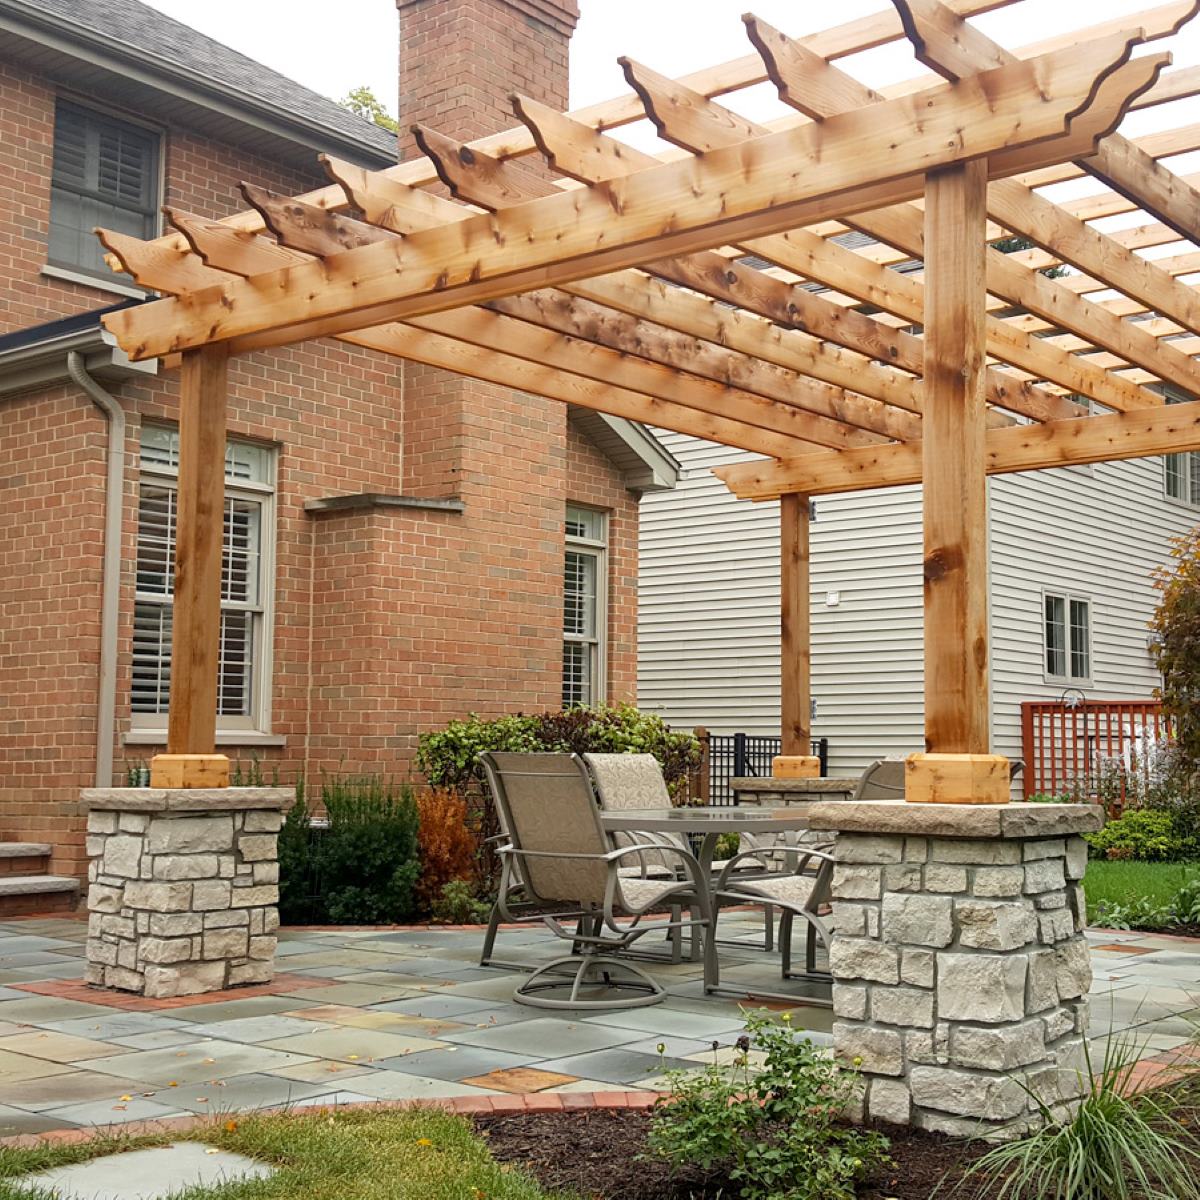 Pergola Flooring Inspiration, Outdoor Flooring Ideas to Enhance Your  Pergola and Create an Inviting Outdoor Living Space